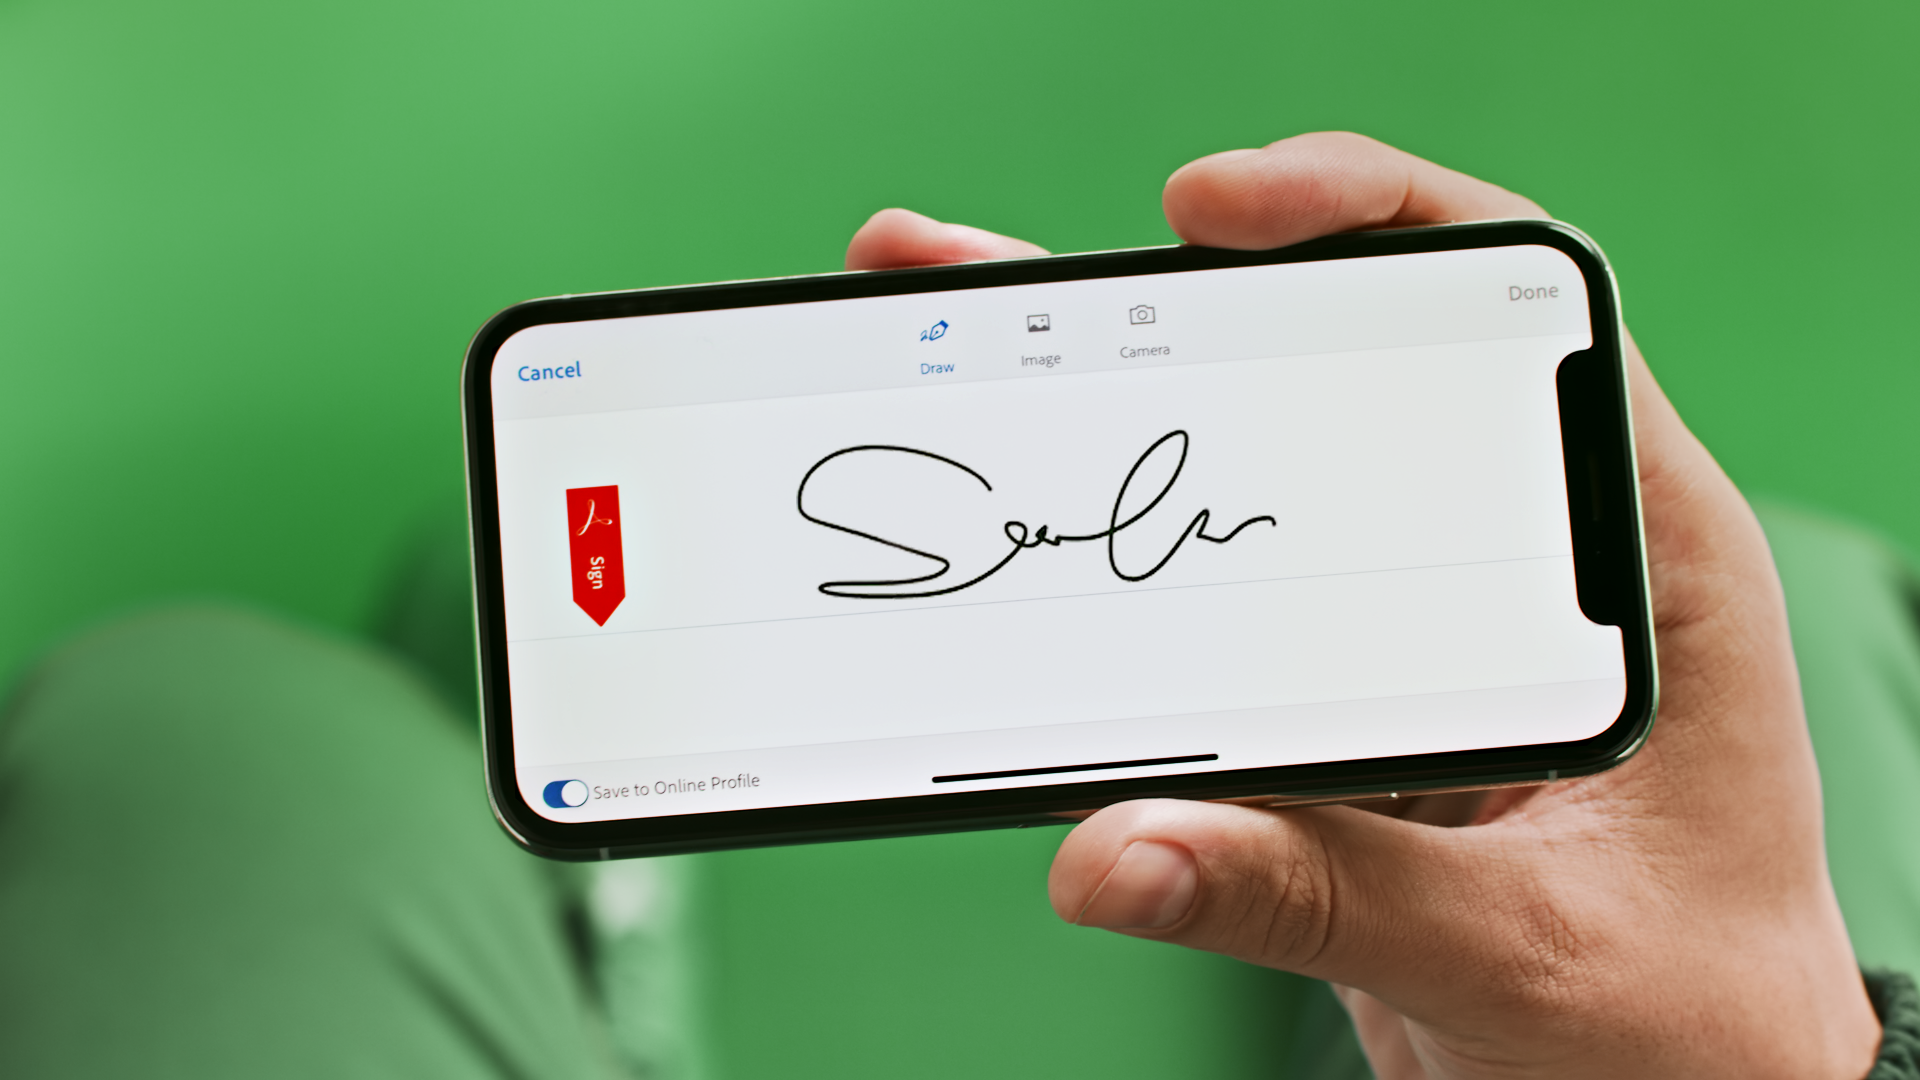 Adobe Releases Major Updates to Acrobat DC, Including Integrated Adobe Sign